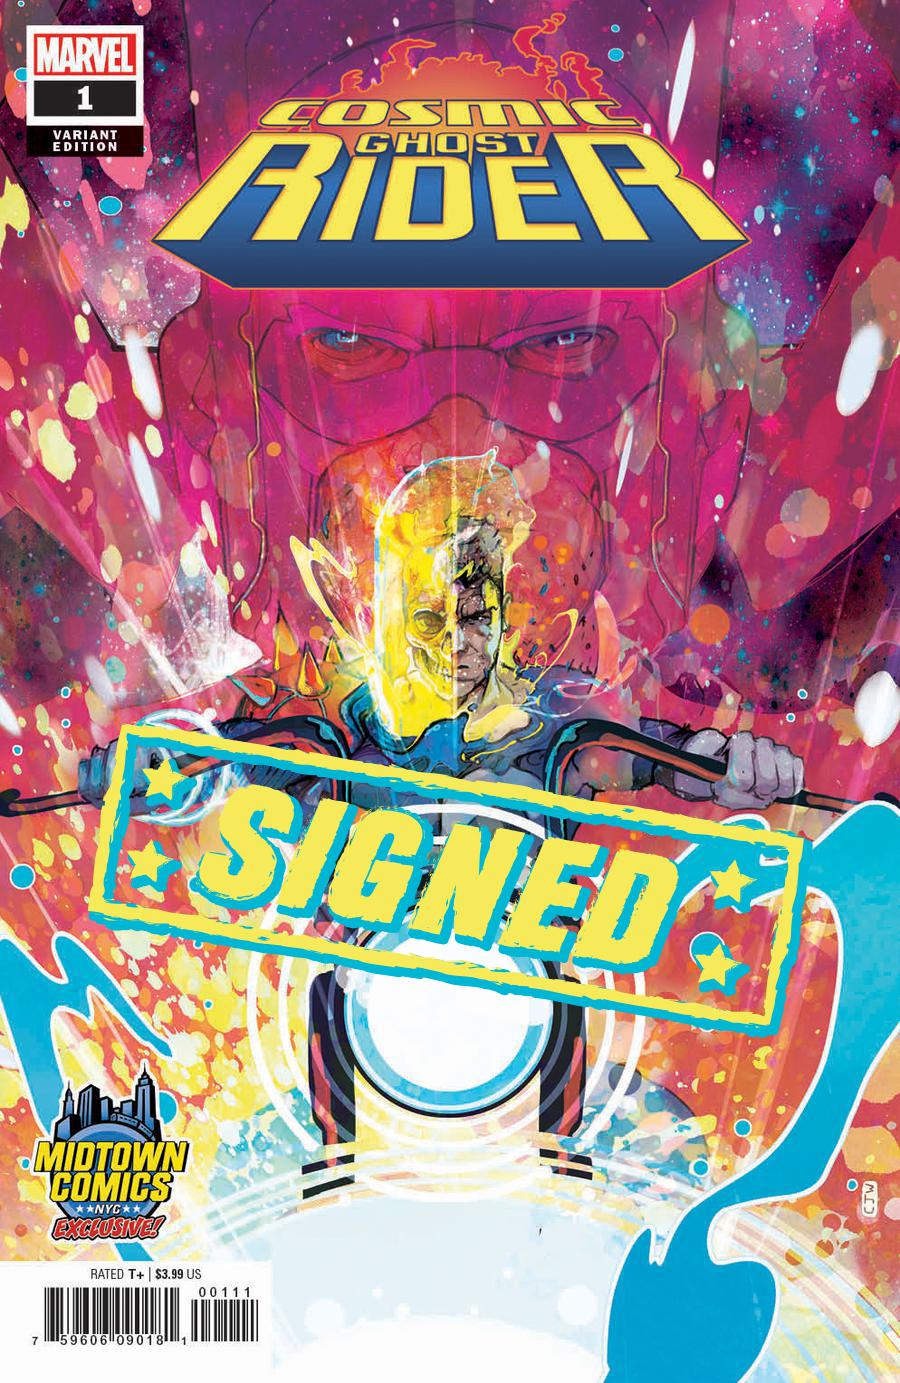 COSMIC GHOST RIDER #4 MARVEL 2018 STANDARD COVER STOCK IMAGE